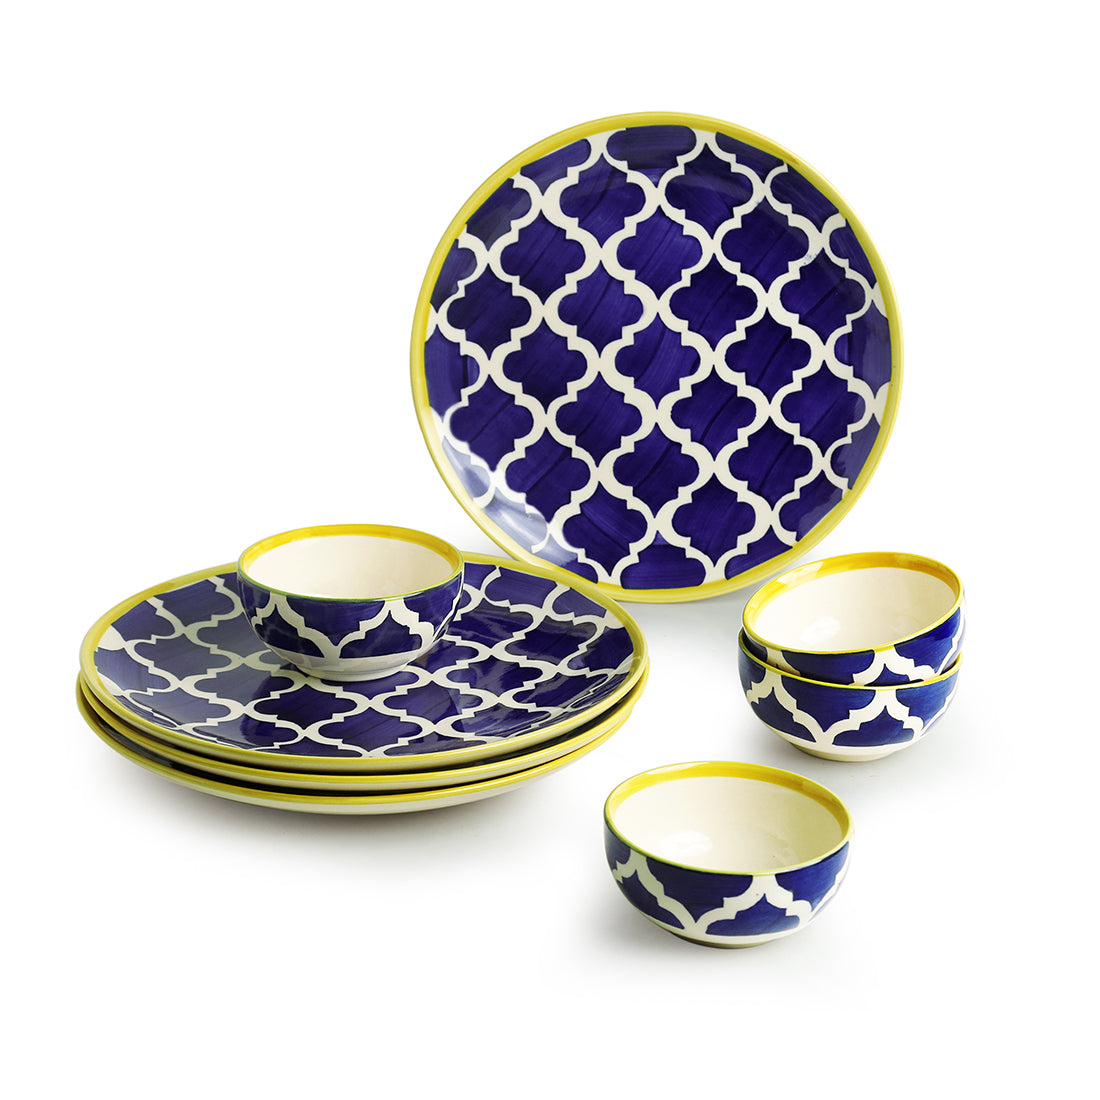 'Moroccan Dining' Handpainted Ceramic Dinner Plates With Katoris (8 Pieces, Serving for 4)